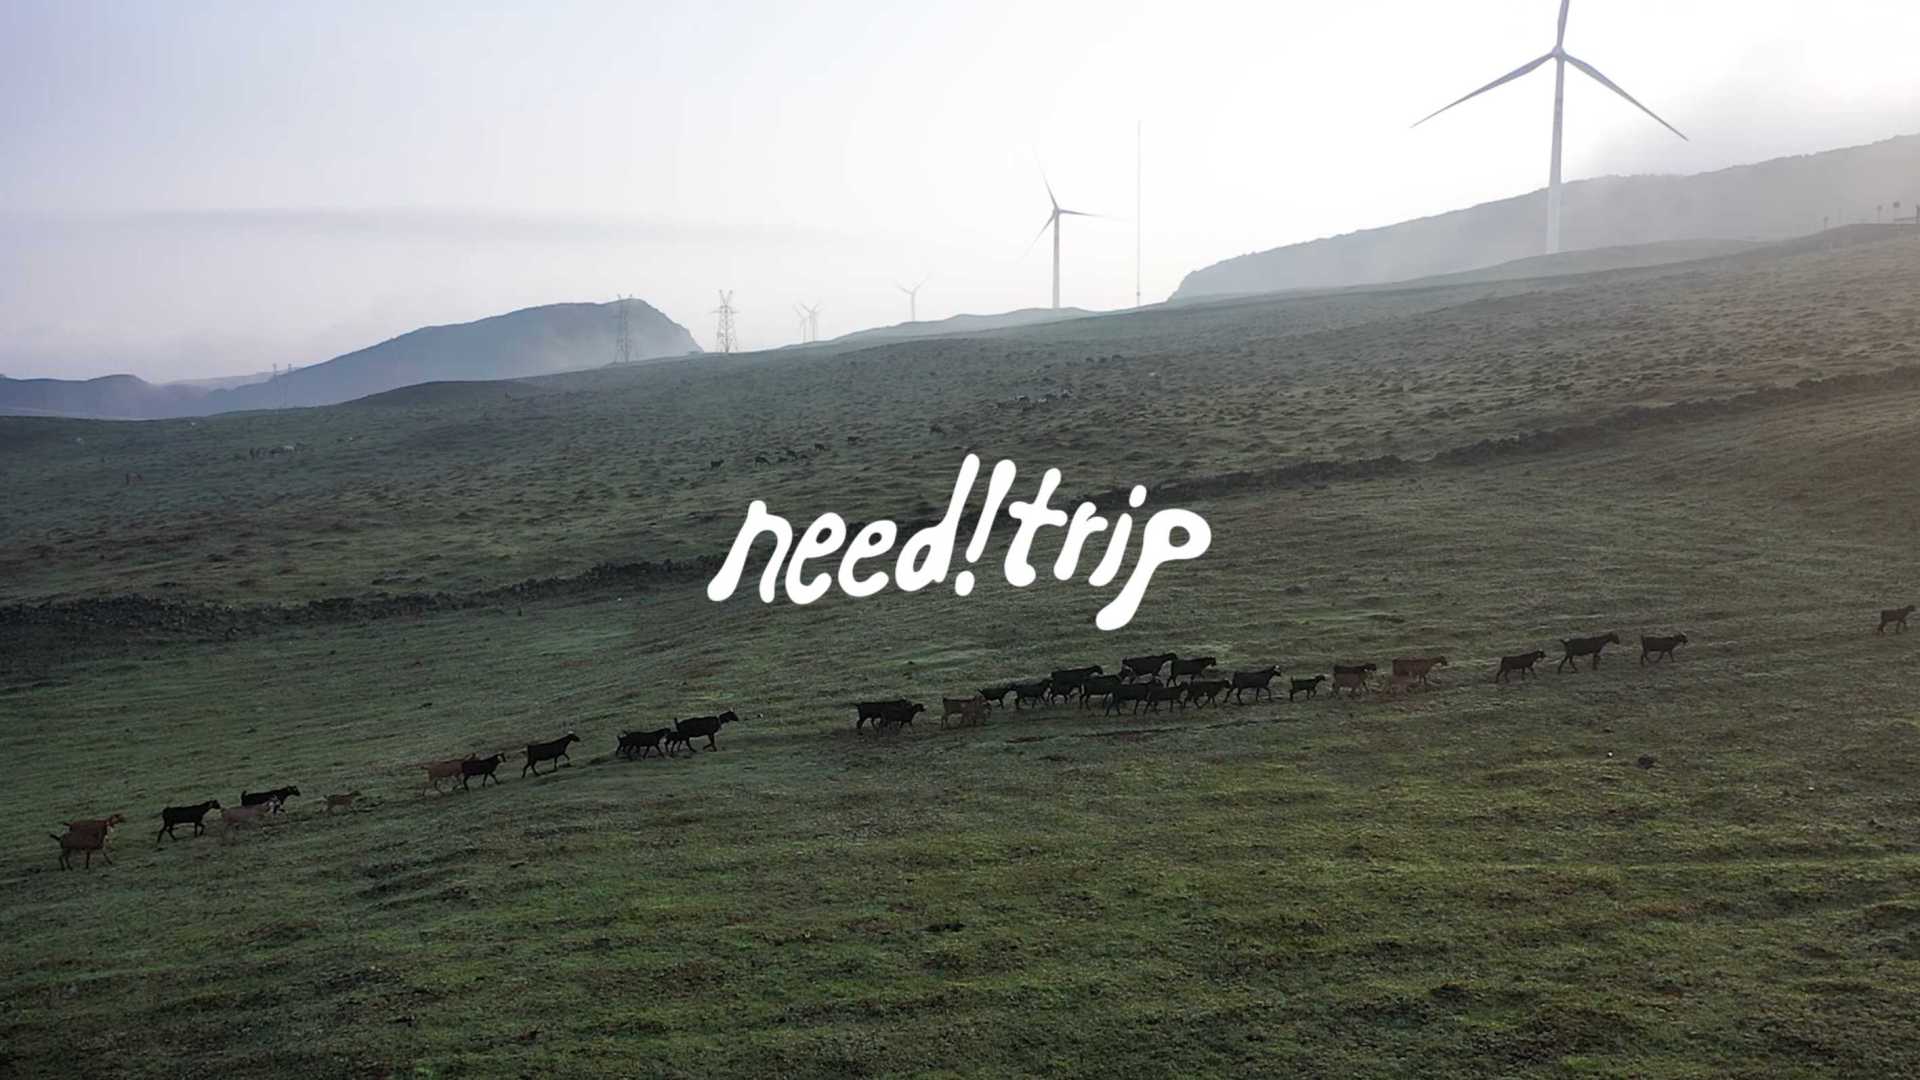 need!trip 贵州｜Dream away from home